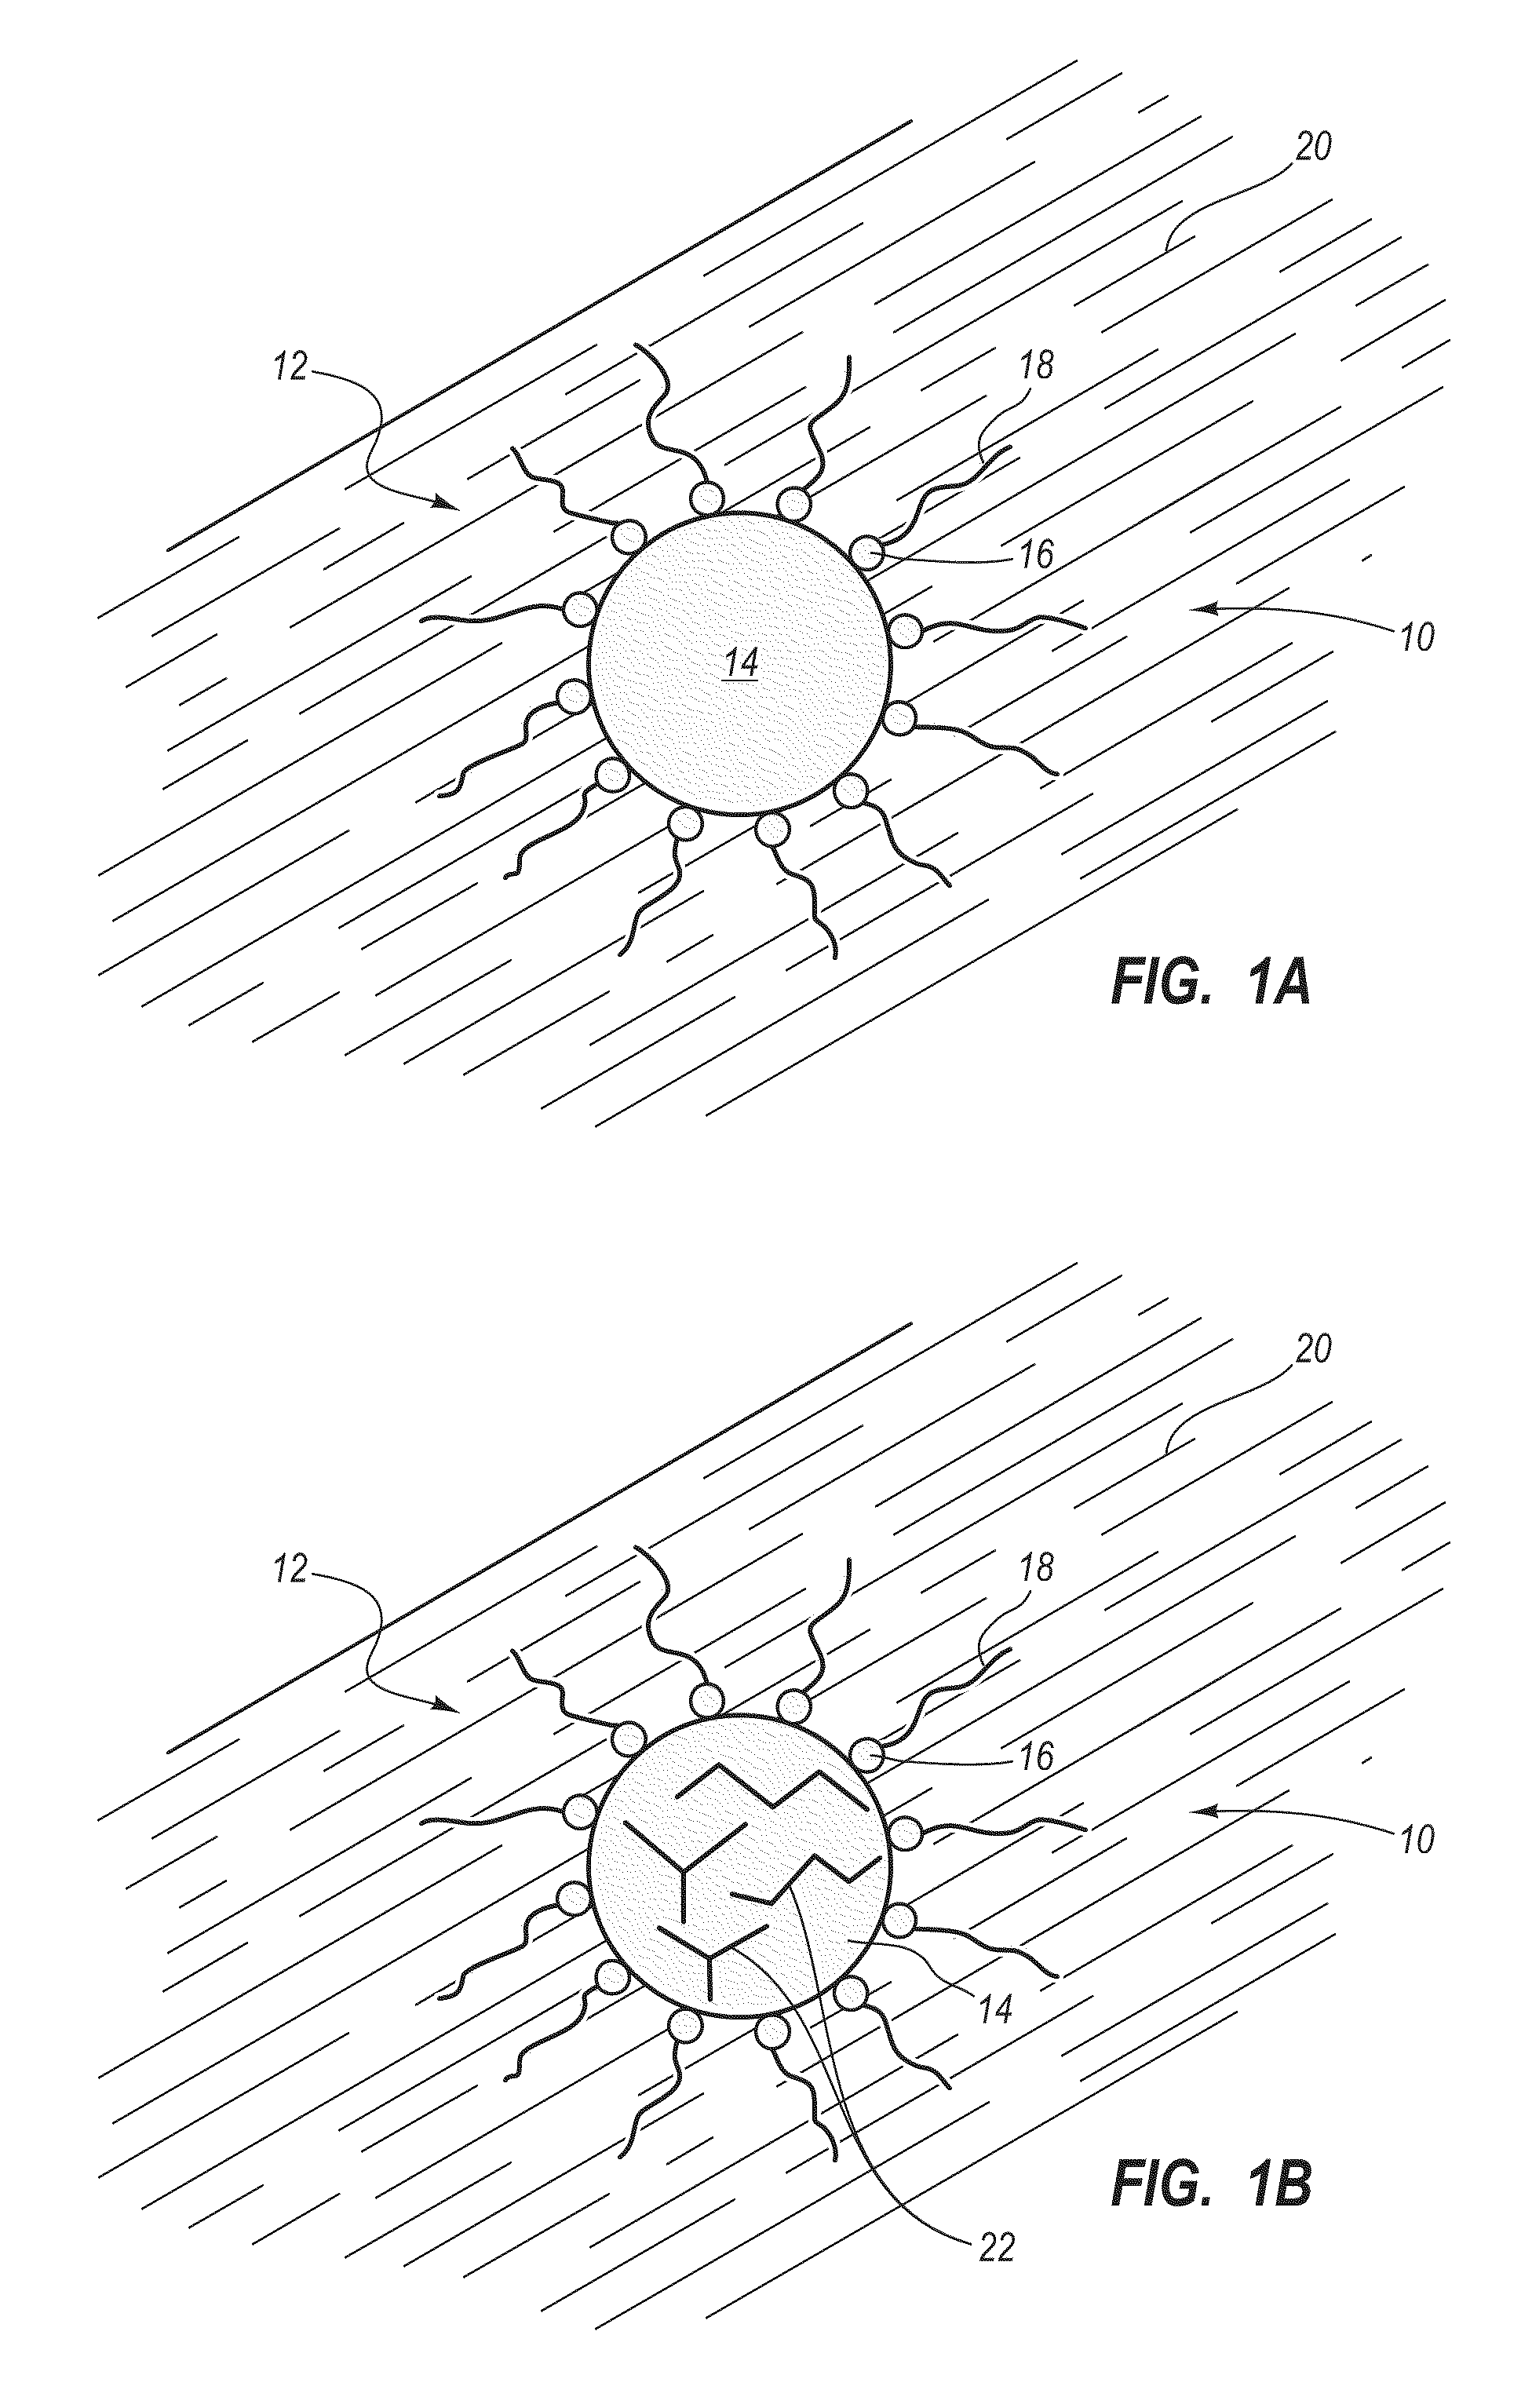 Preparation of a carbon nanomaterial using a reverse microemulsion